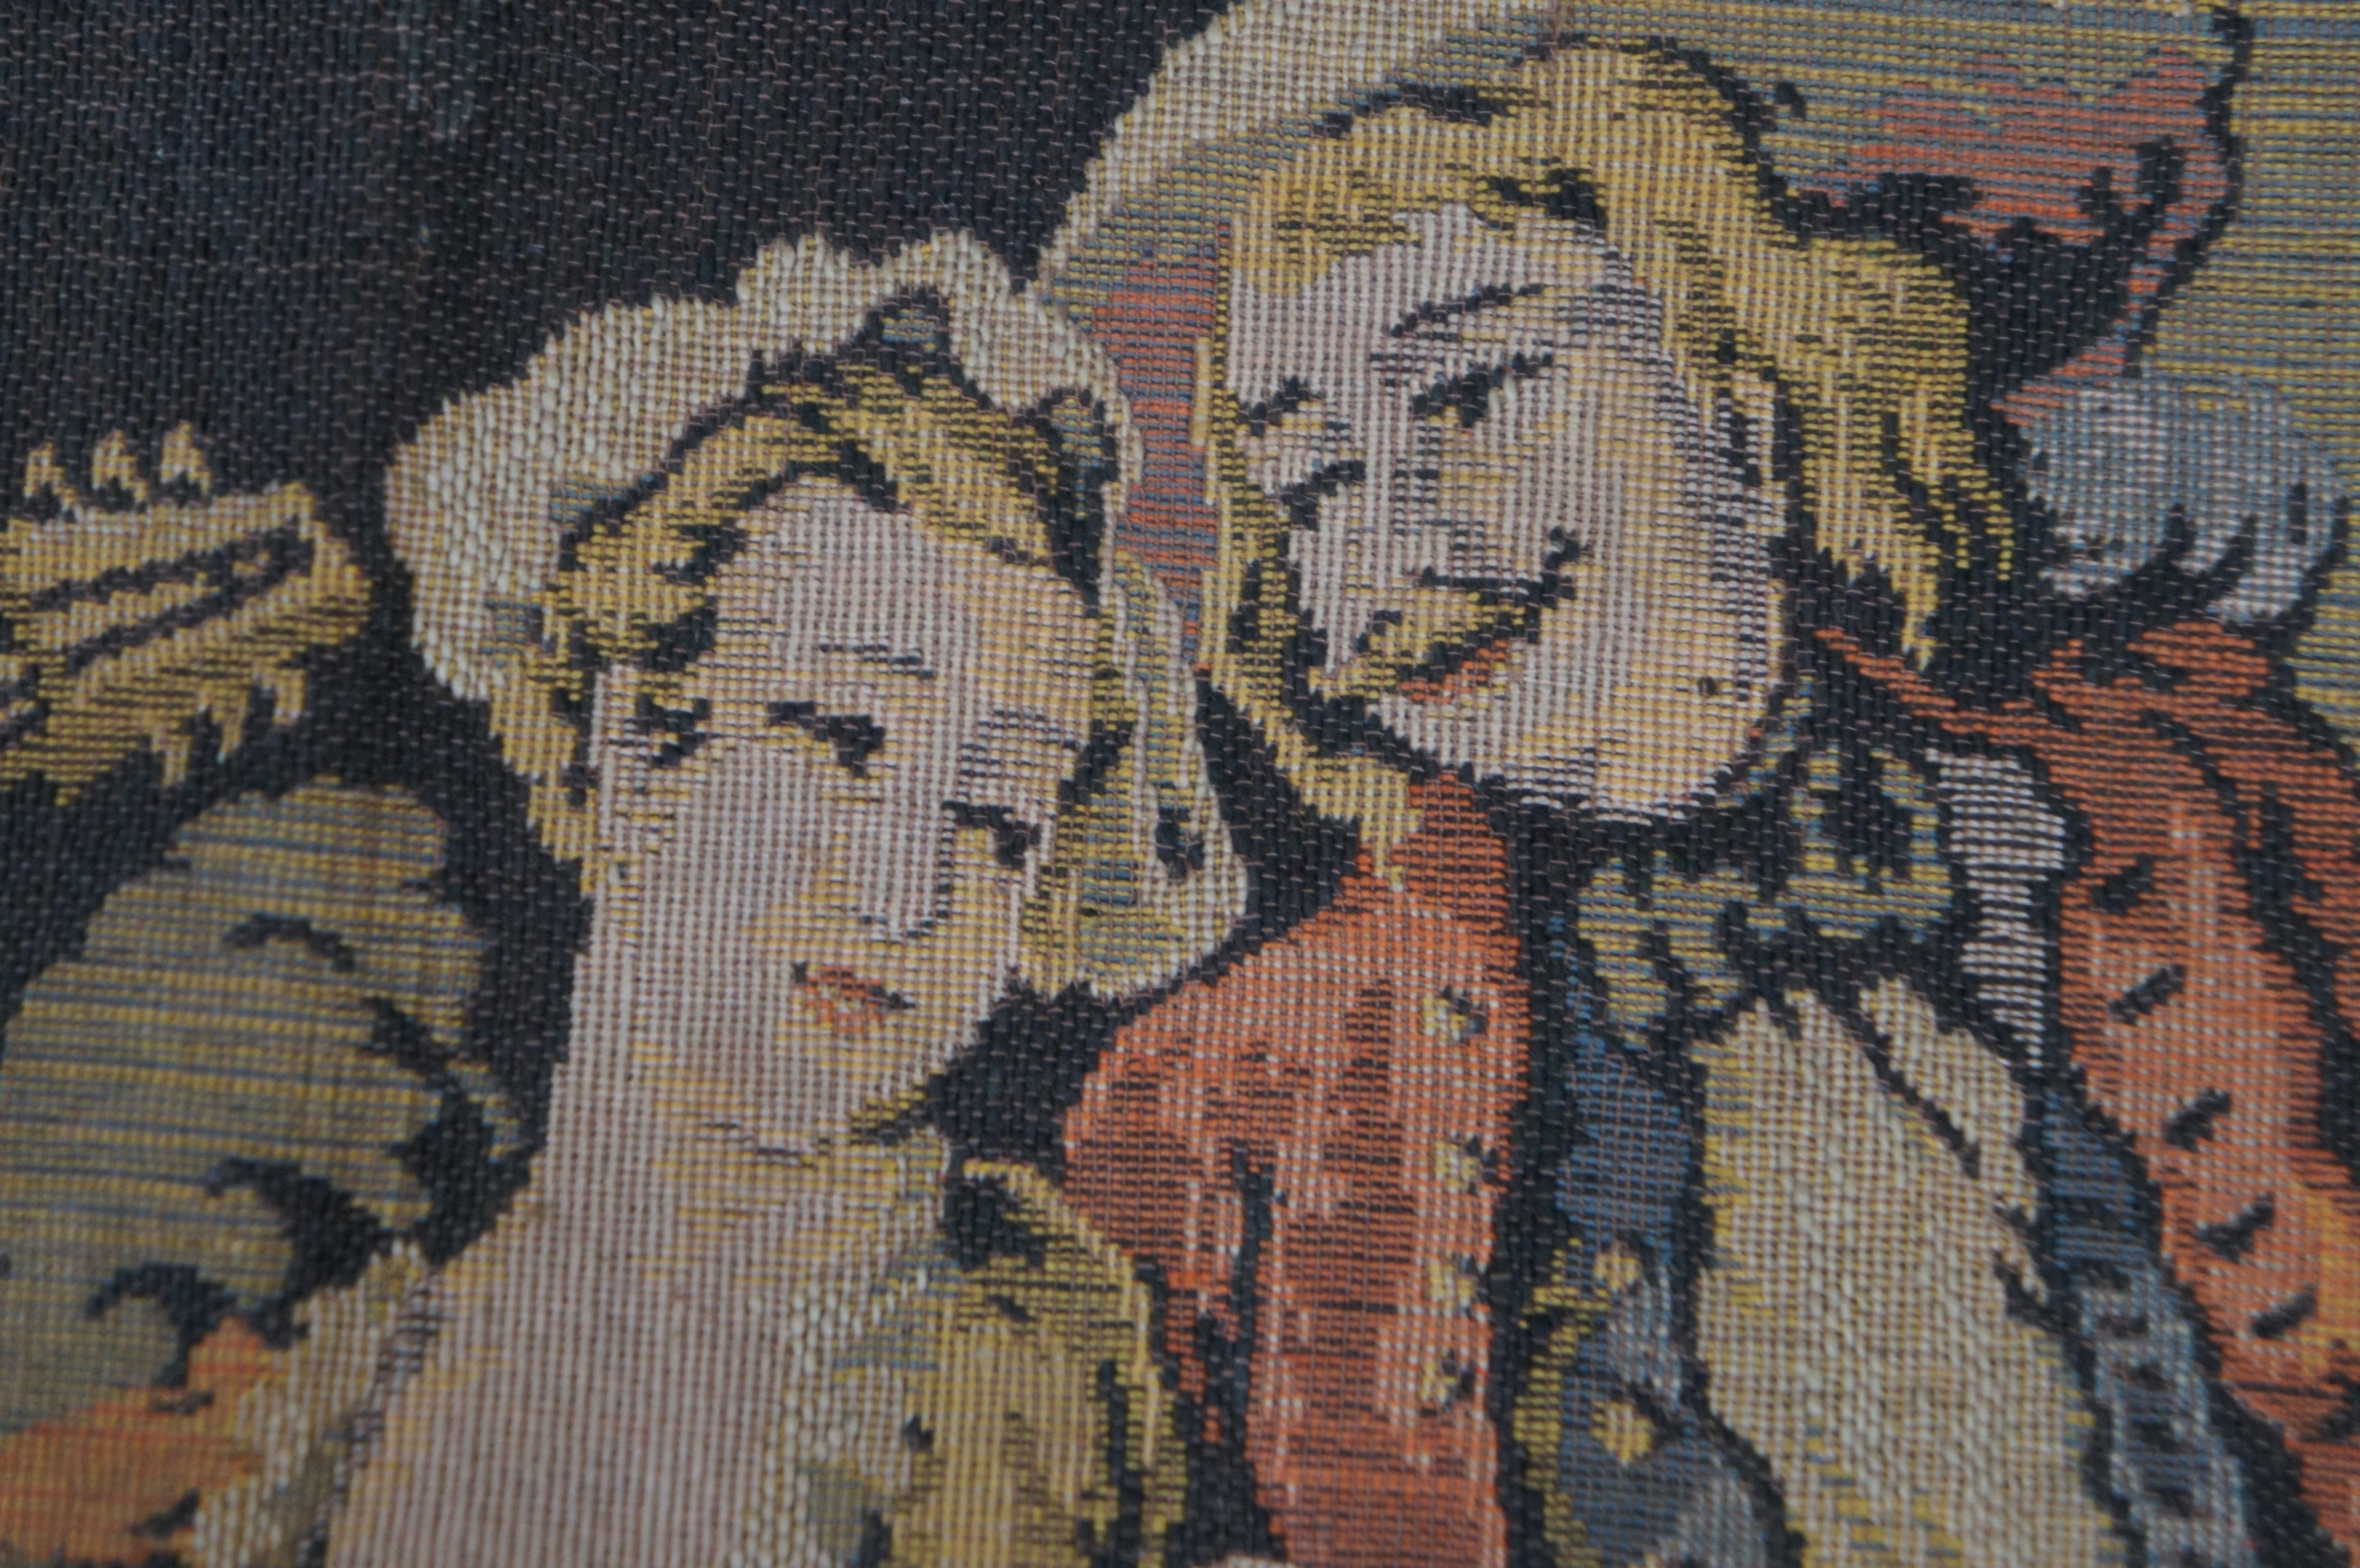 Vintage Belgium Woven Tavern Pub Theme Wall Hanging Tapestry Textile 55